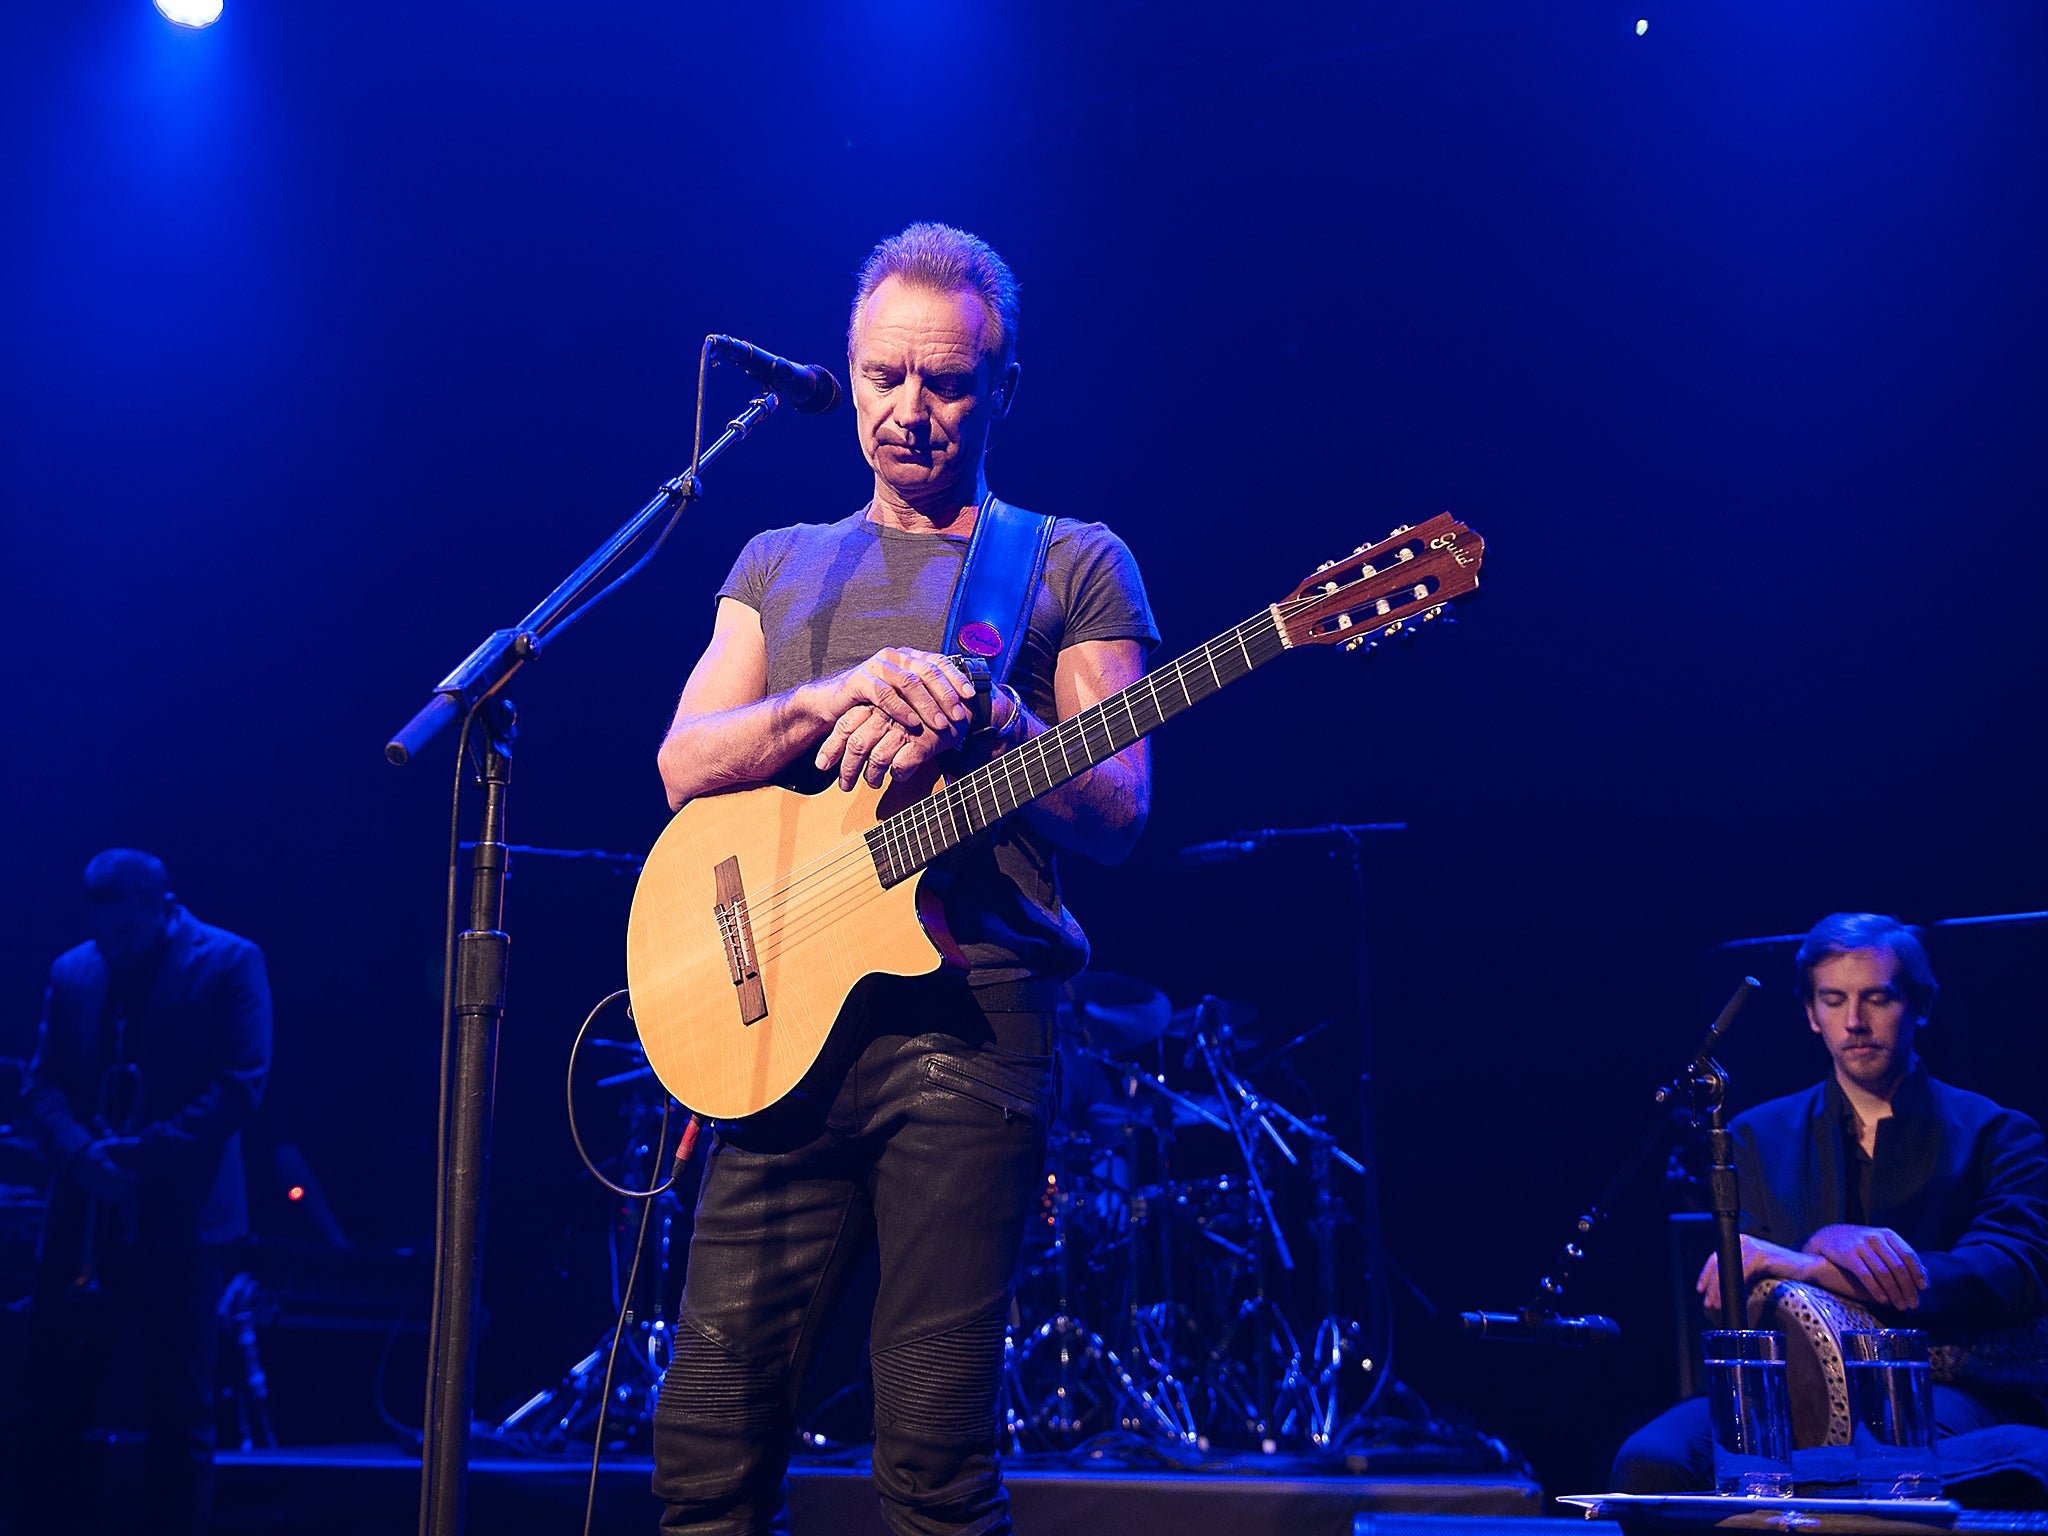 Sting performs at the Bataclan concert hall in Paris during the reopening concert to mark the first anniversary of the of the Paris terrorist attacks